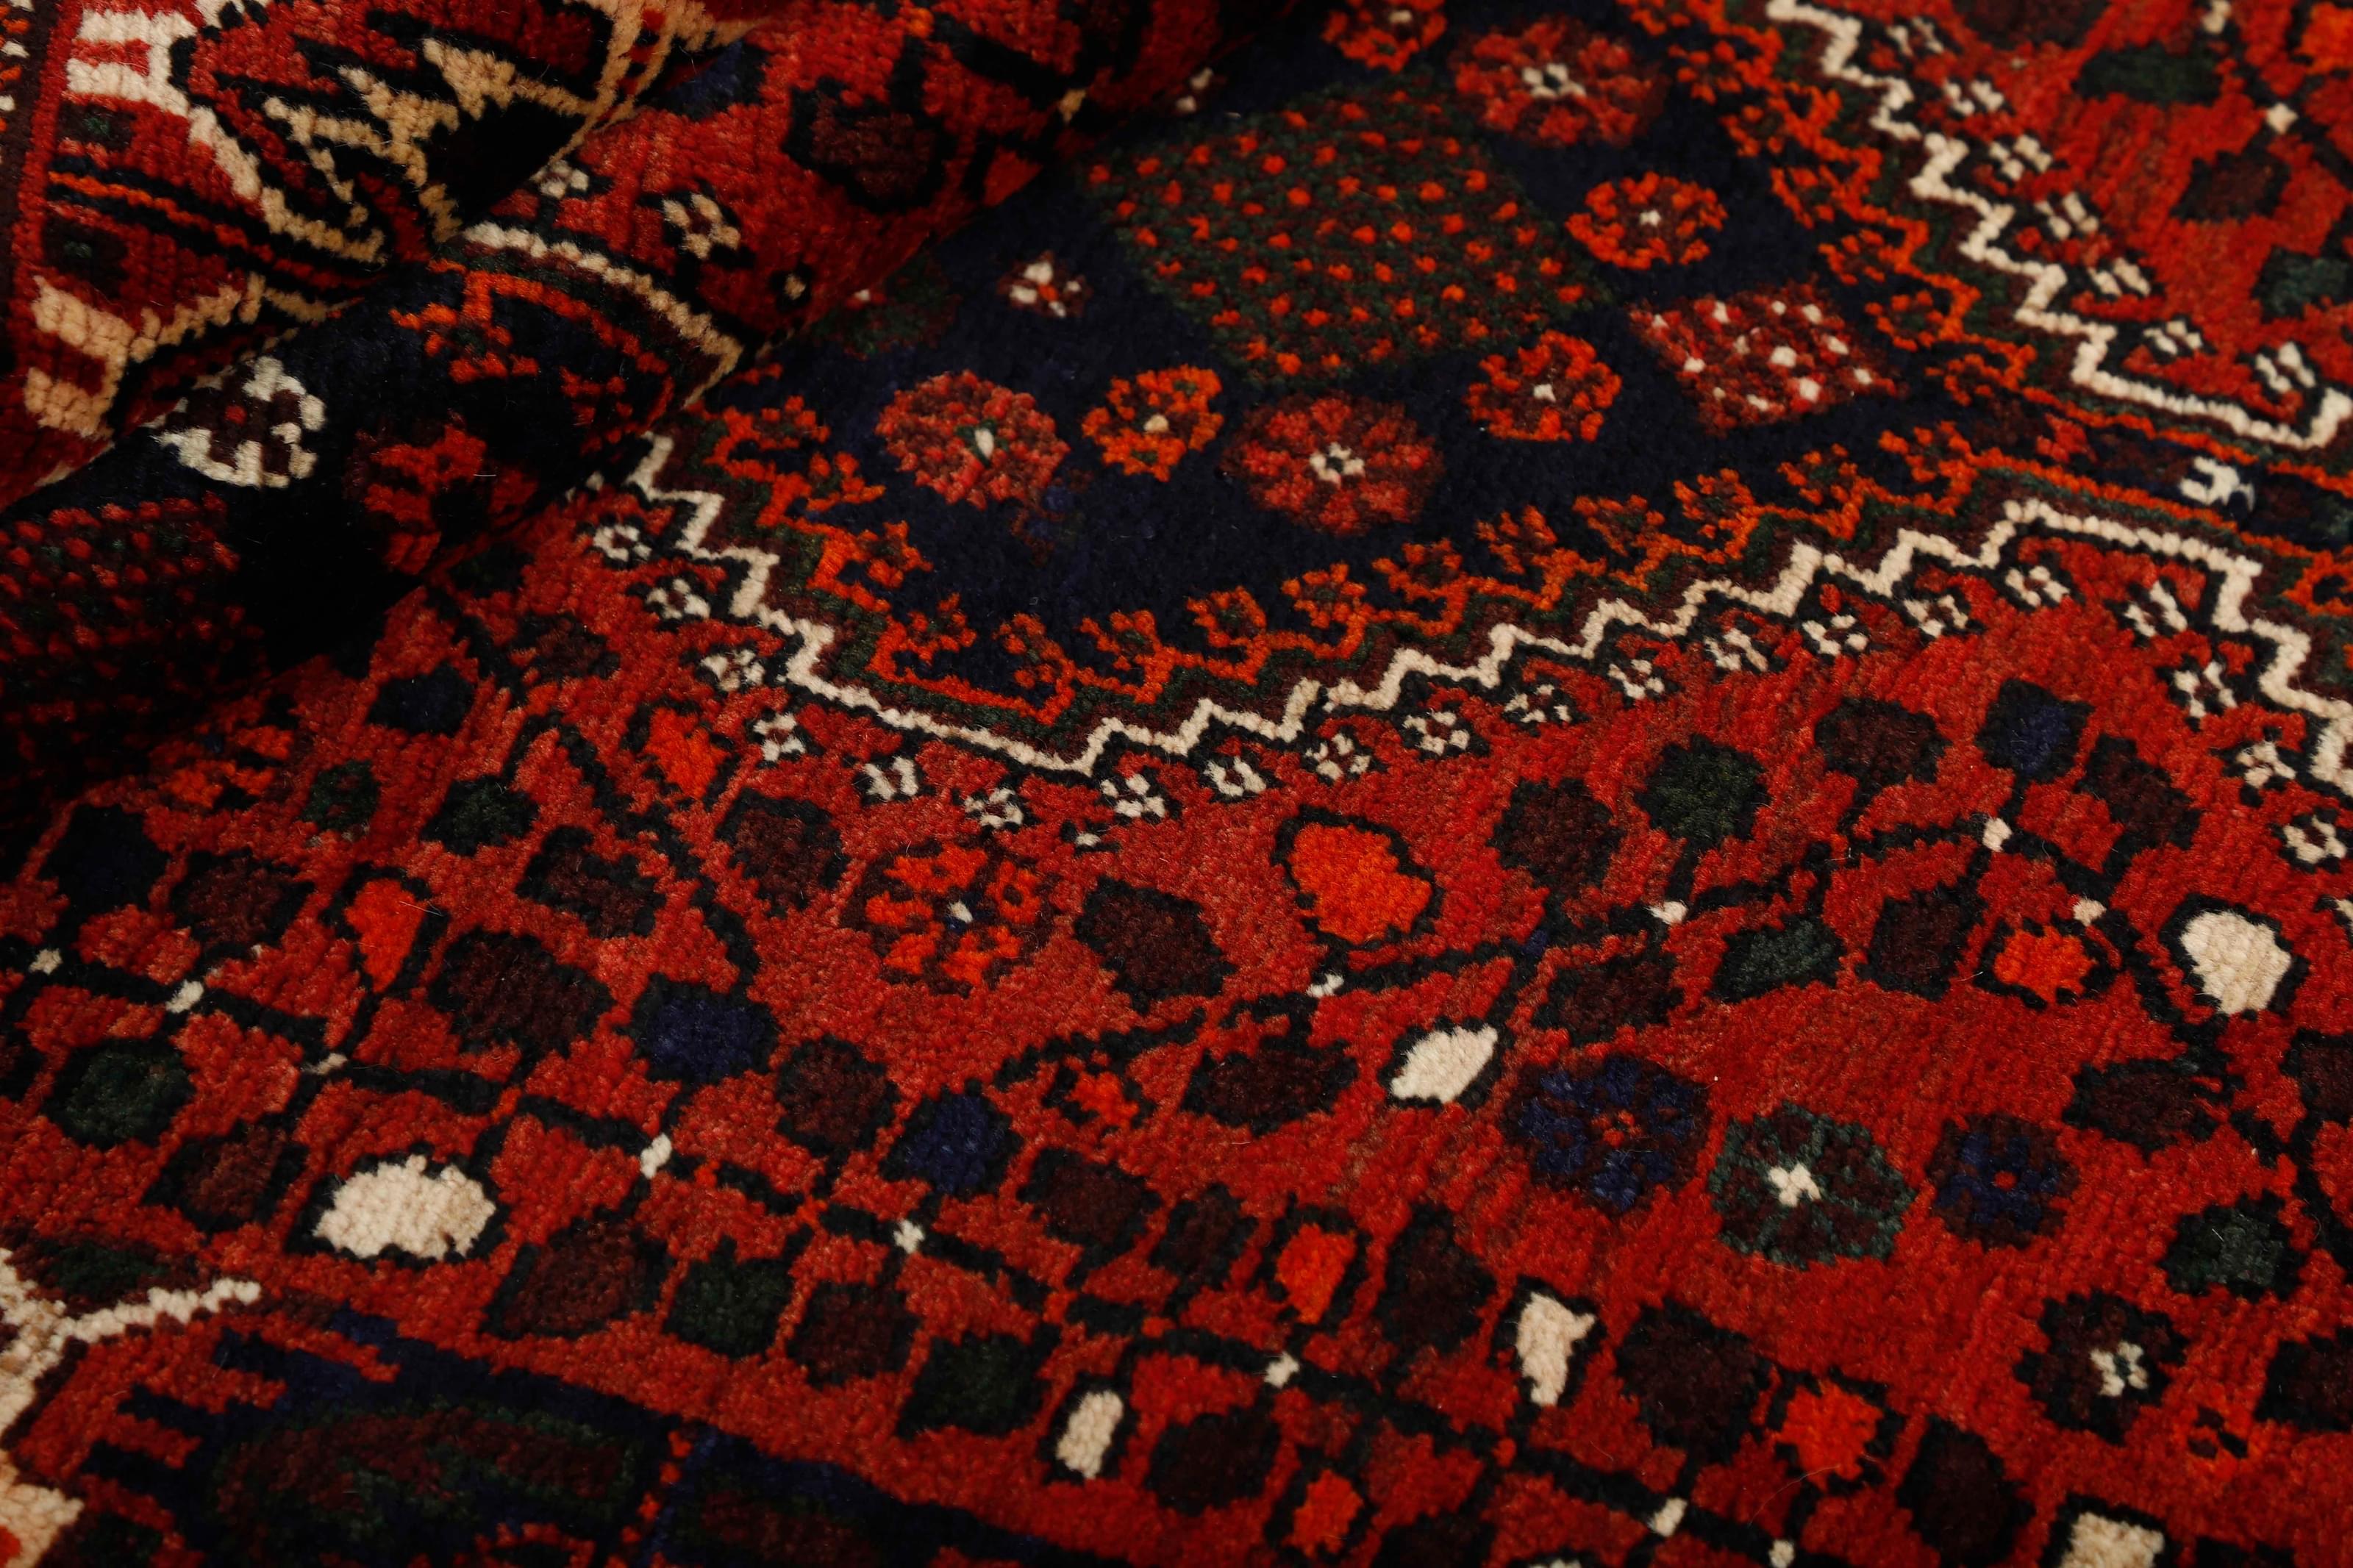 Authentic persian rug with a traditional tribal geometric pattern in red